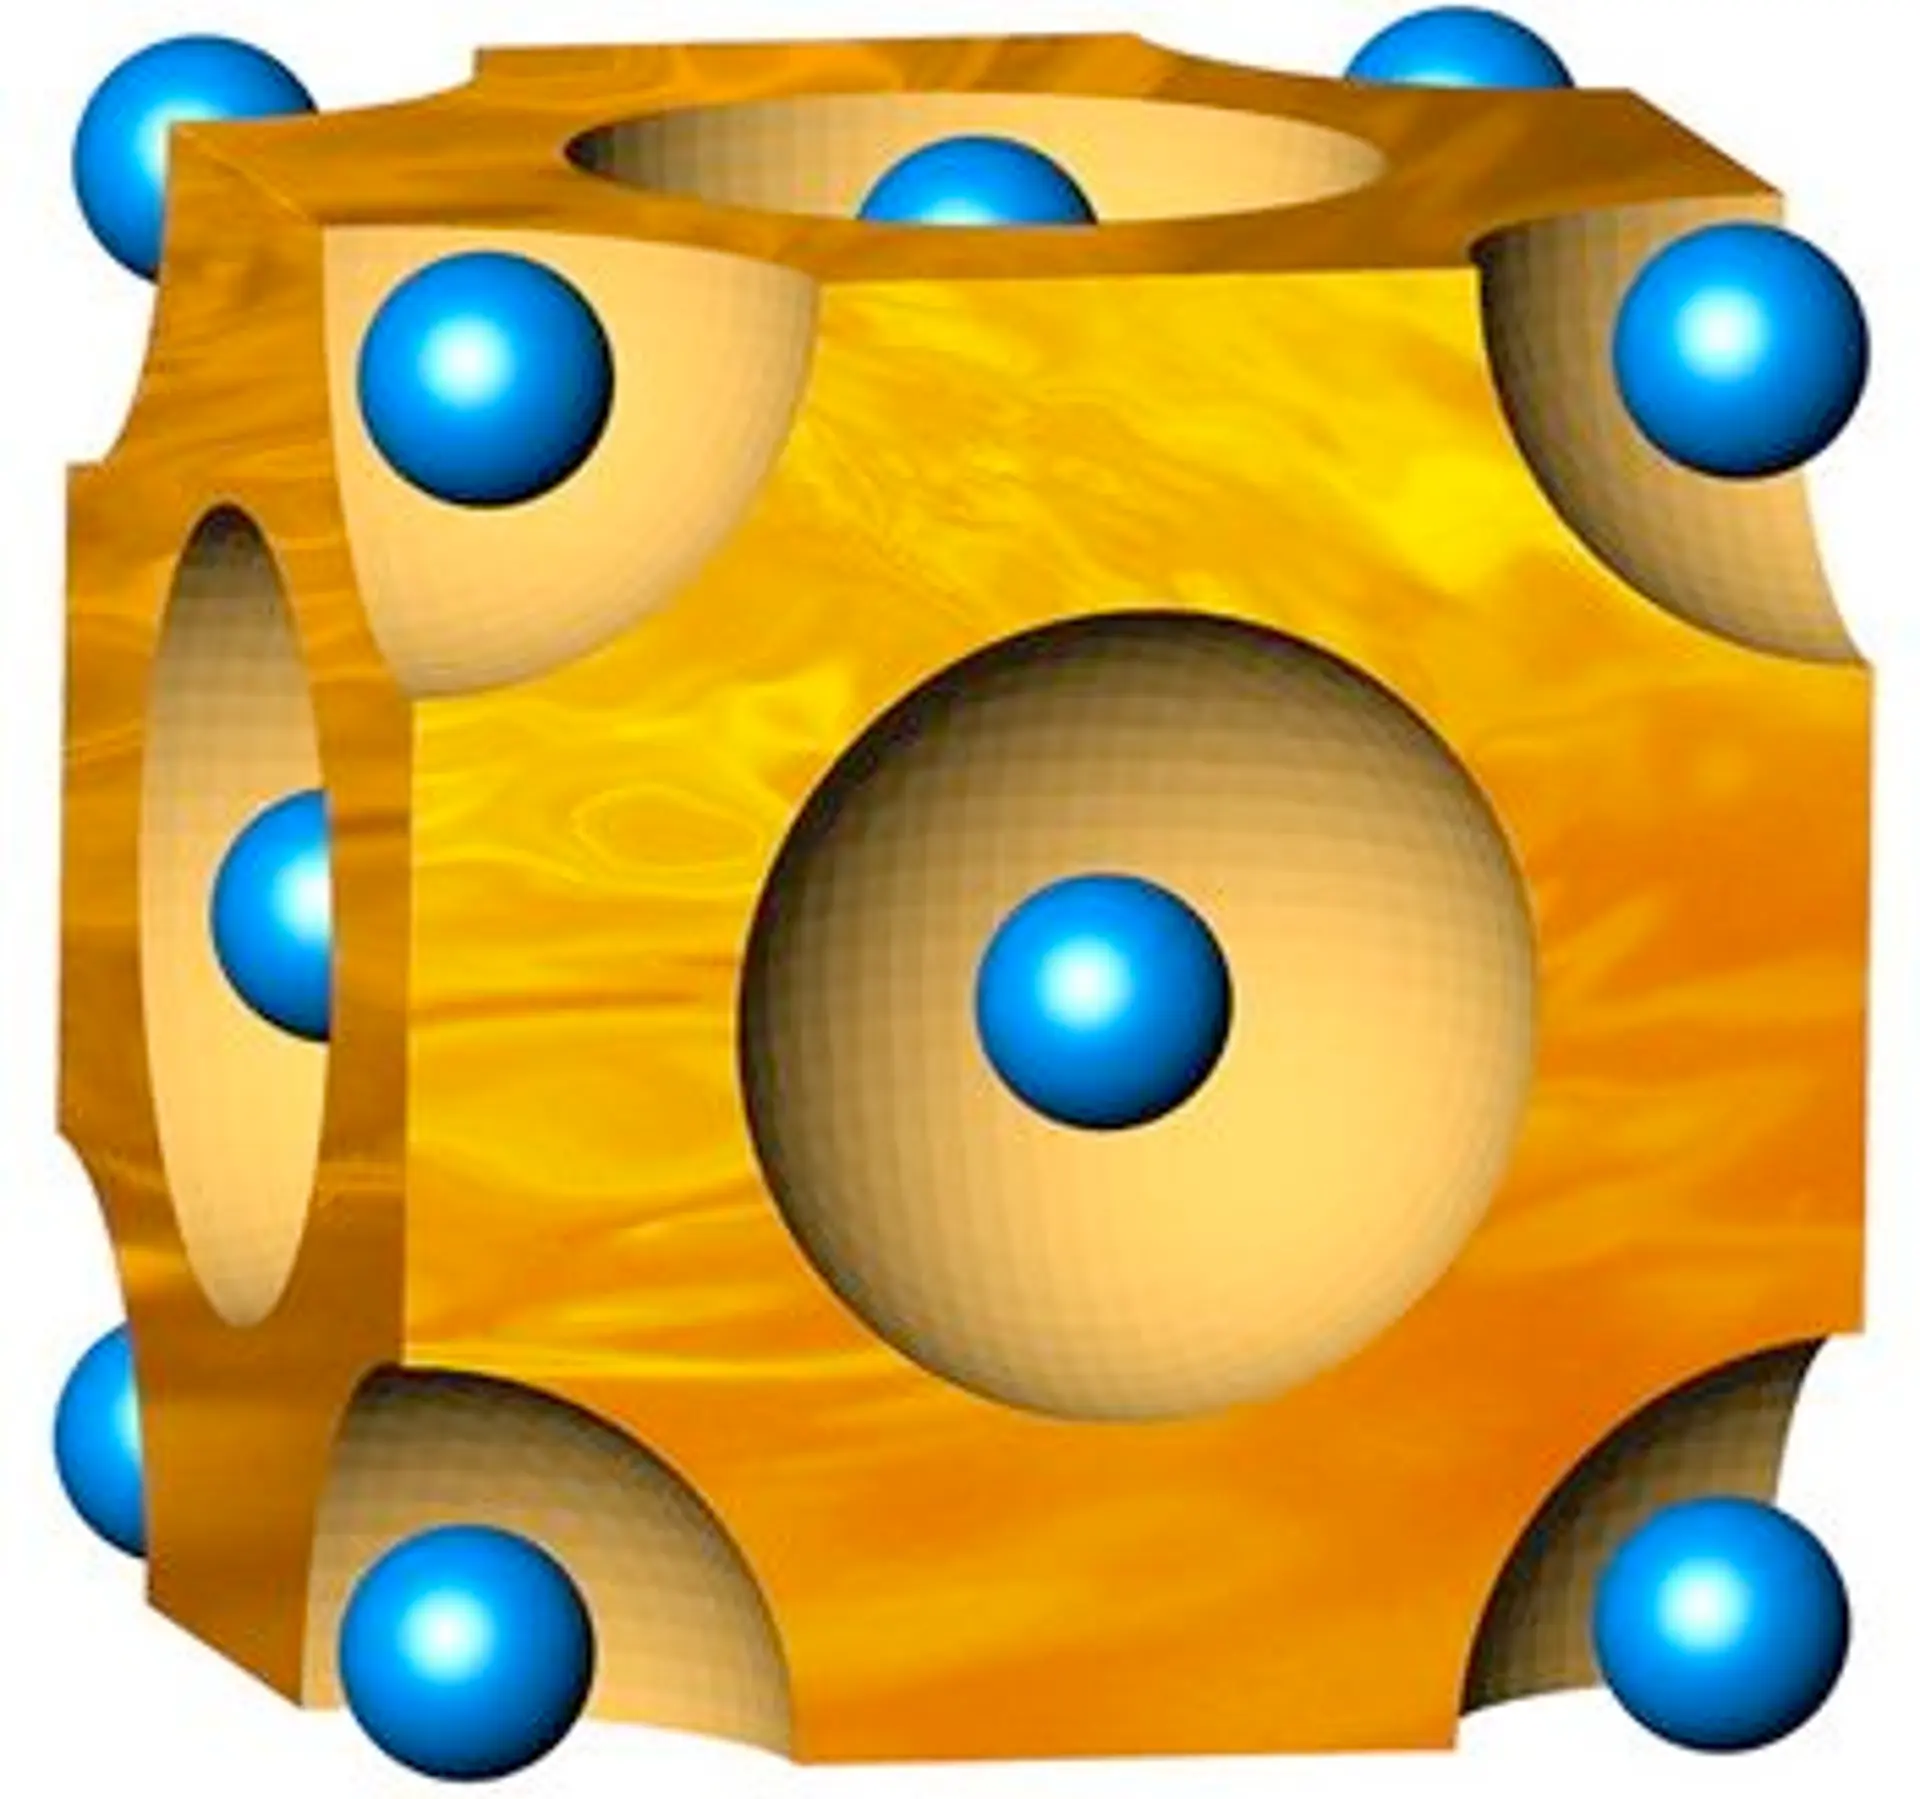 In this diagram, the blue spheres represent selenium atoms forming a crystal lattice, while the orange regions represent the copper atoms that flow through the crystal structure like a liquid (Image: Caltech/Jeff Snyder/Lance Hayashida)